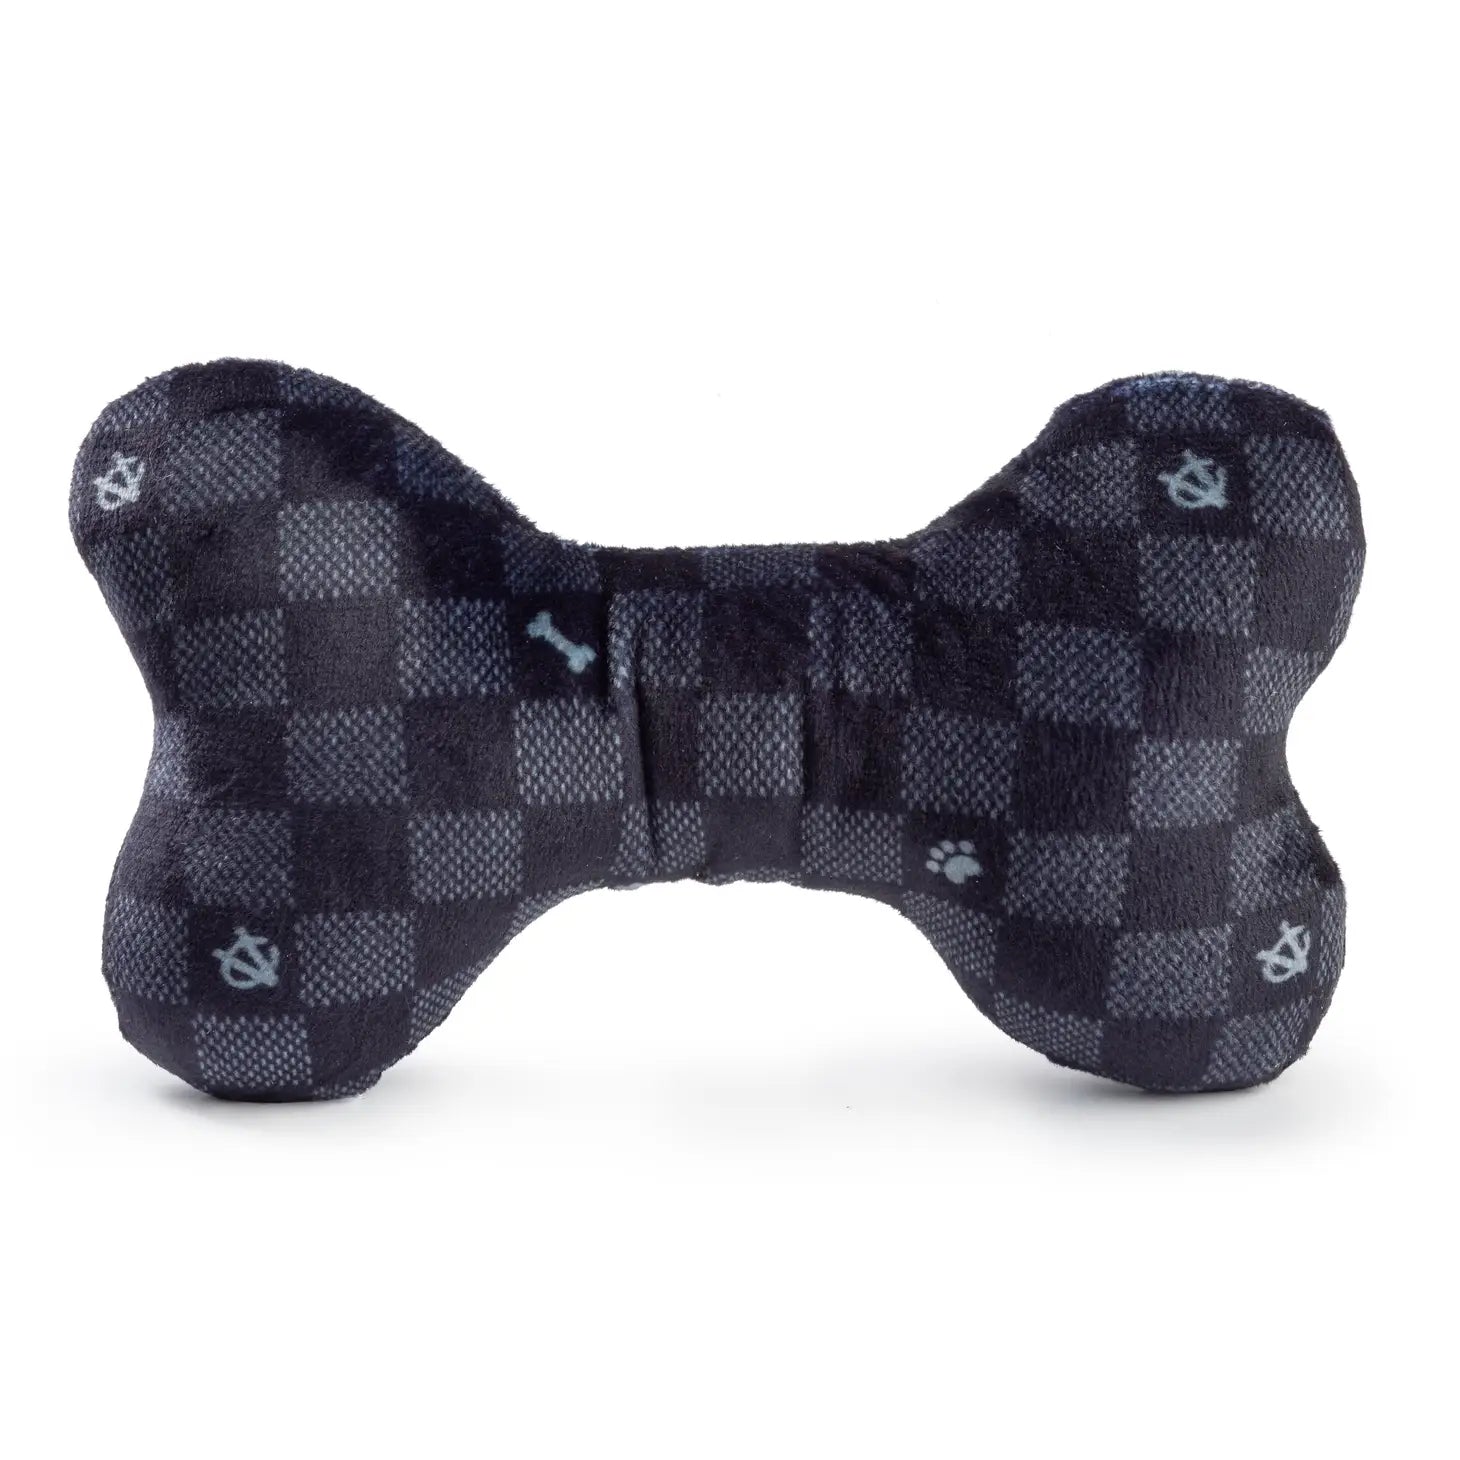 chewy vuitton dog toy small